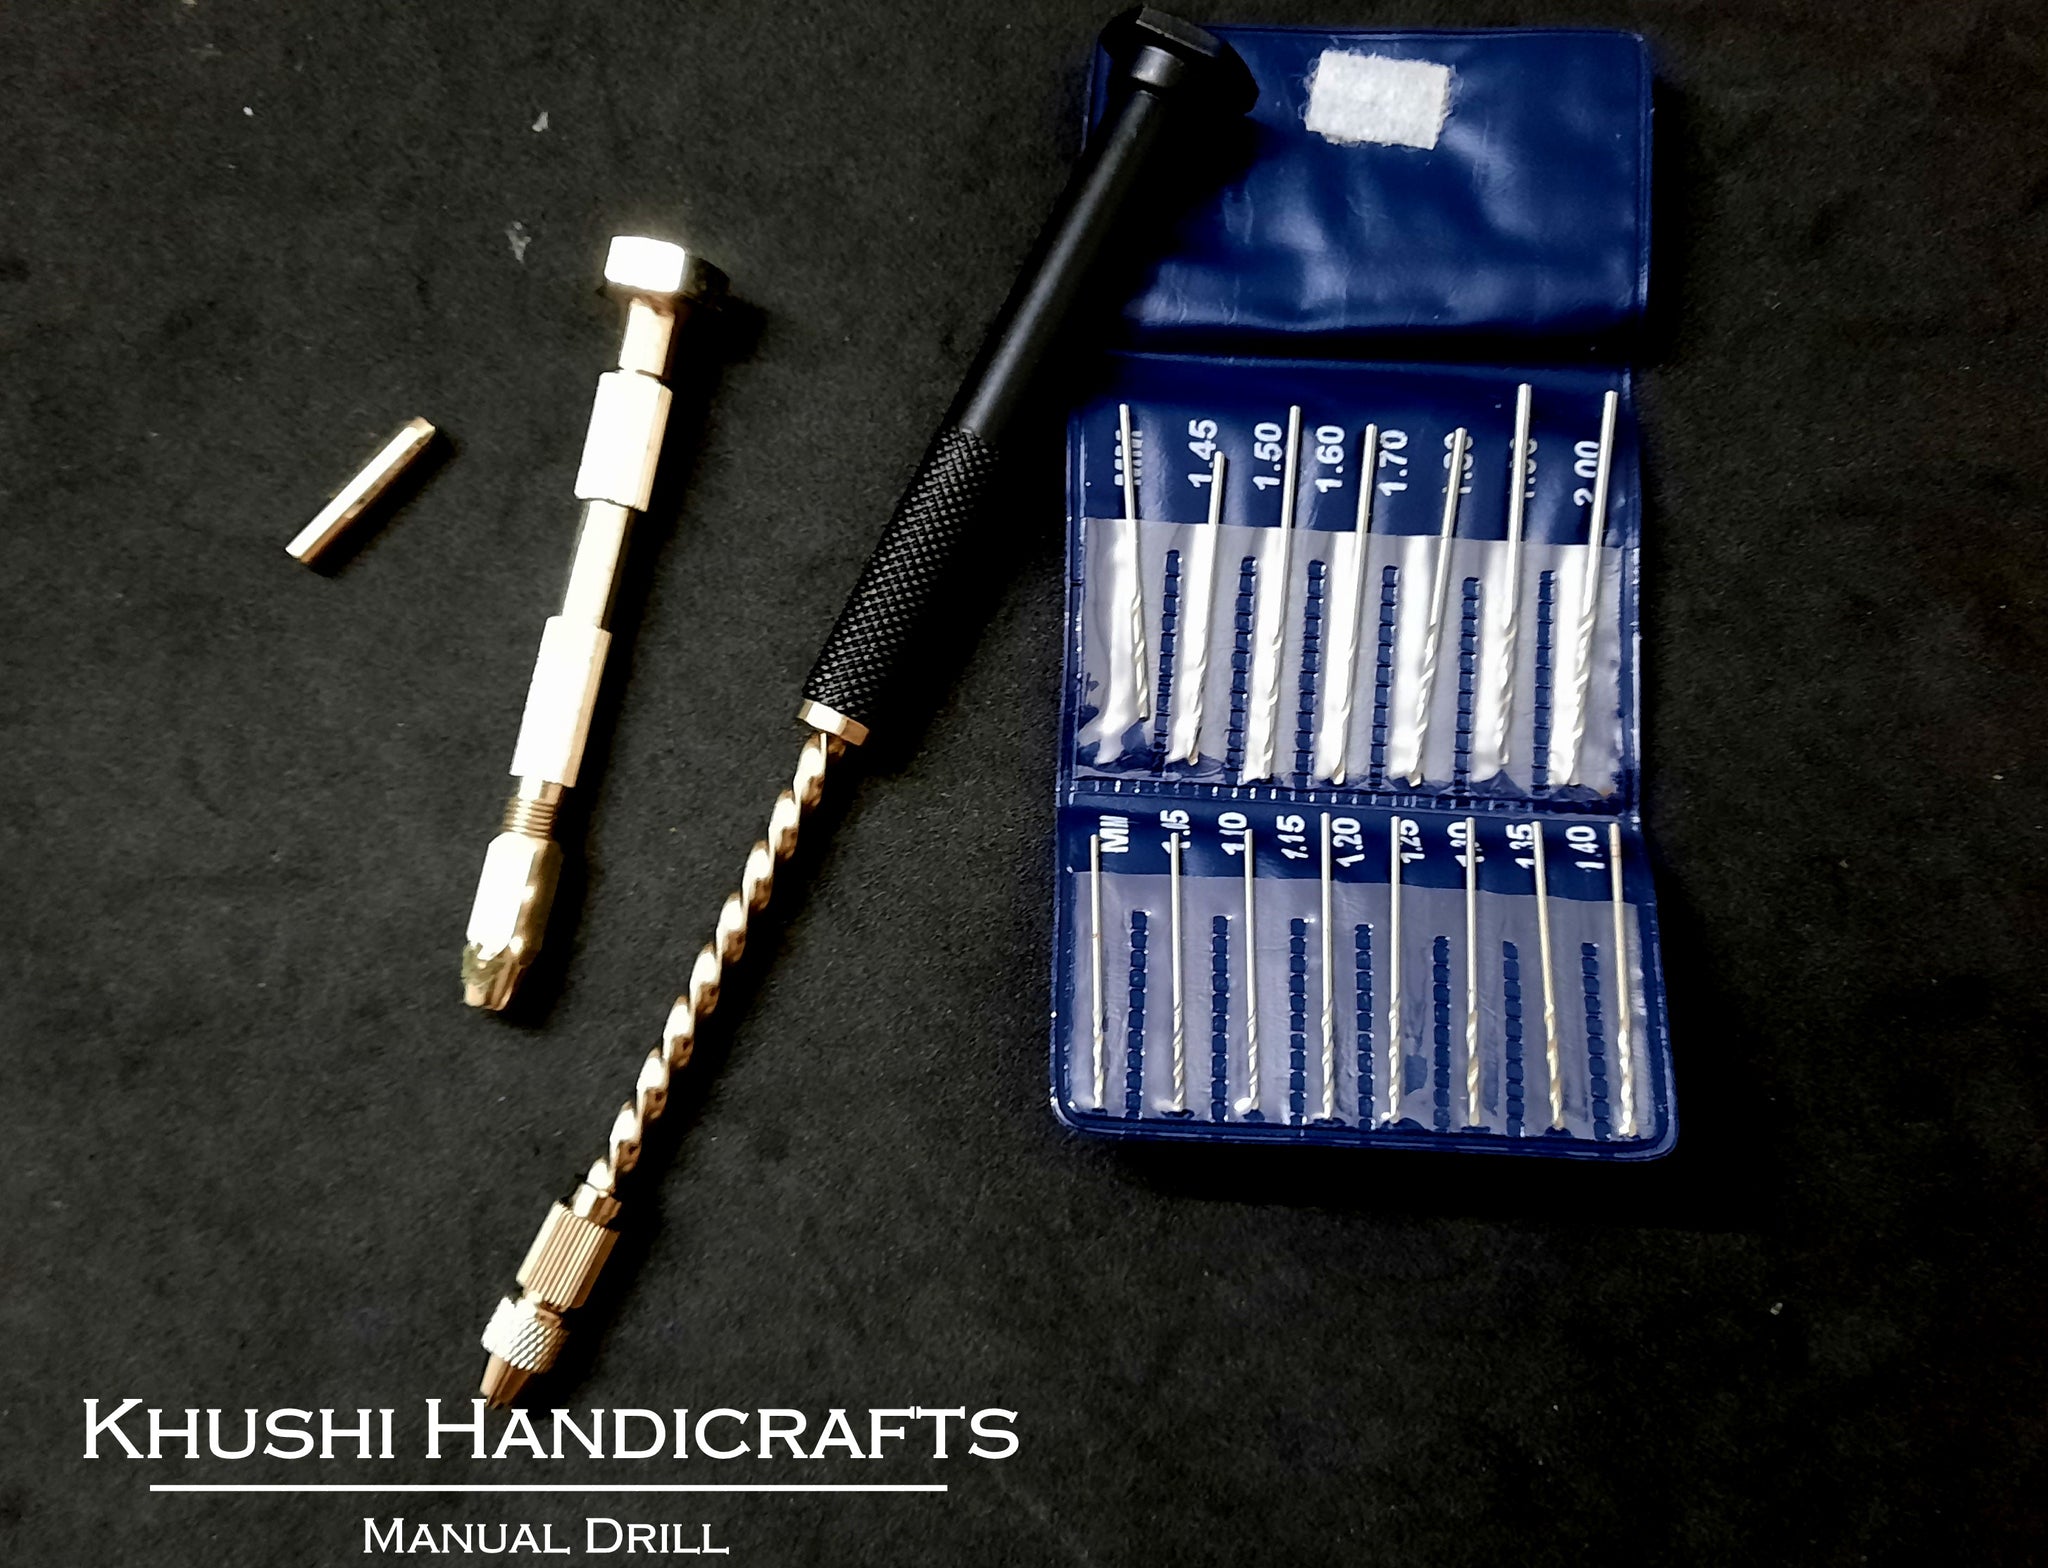 Manual hand drill for resin crafts